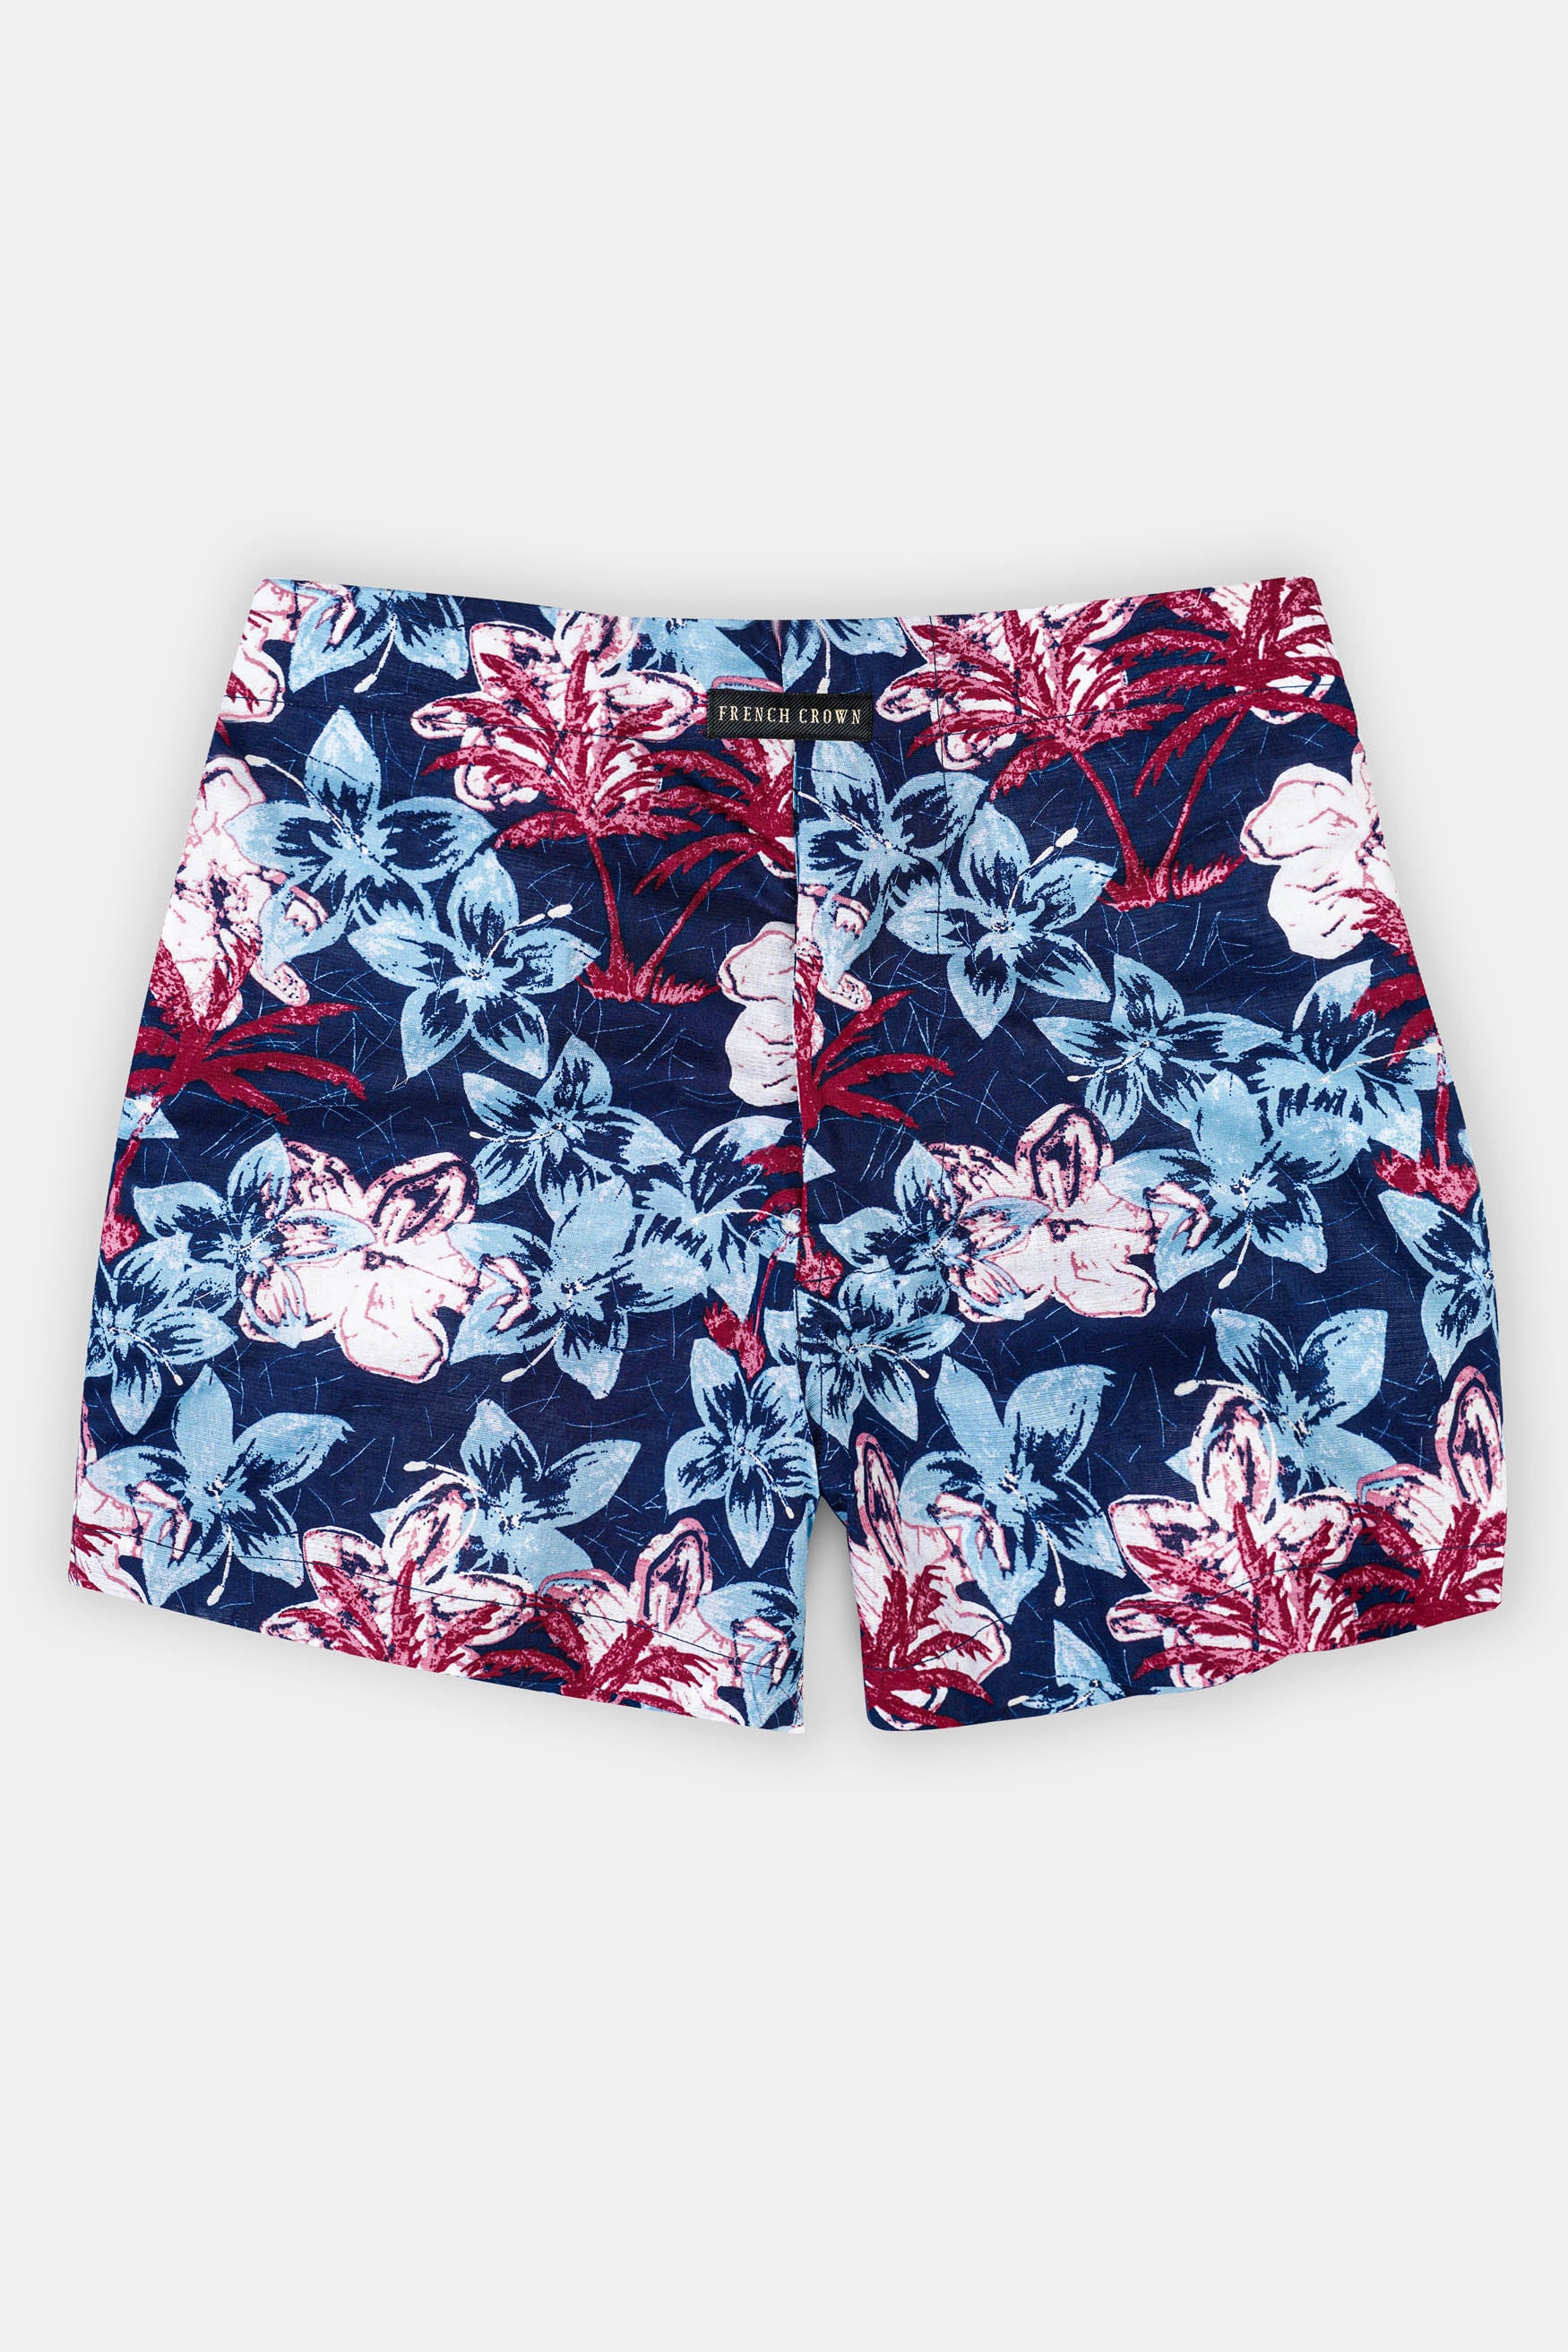 Midnight Blue and Carolina Blue Multicolour Floral Printed Luxurious Linen Boxer